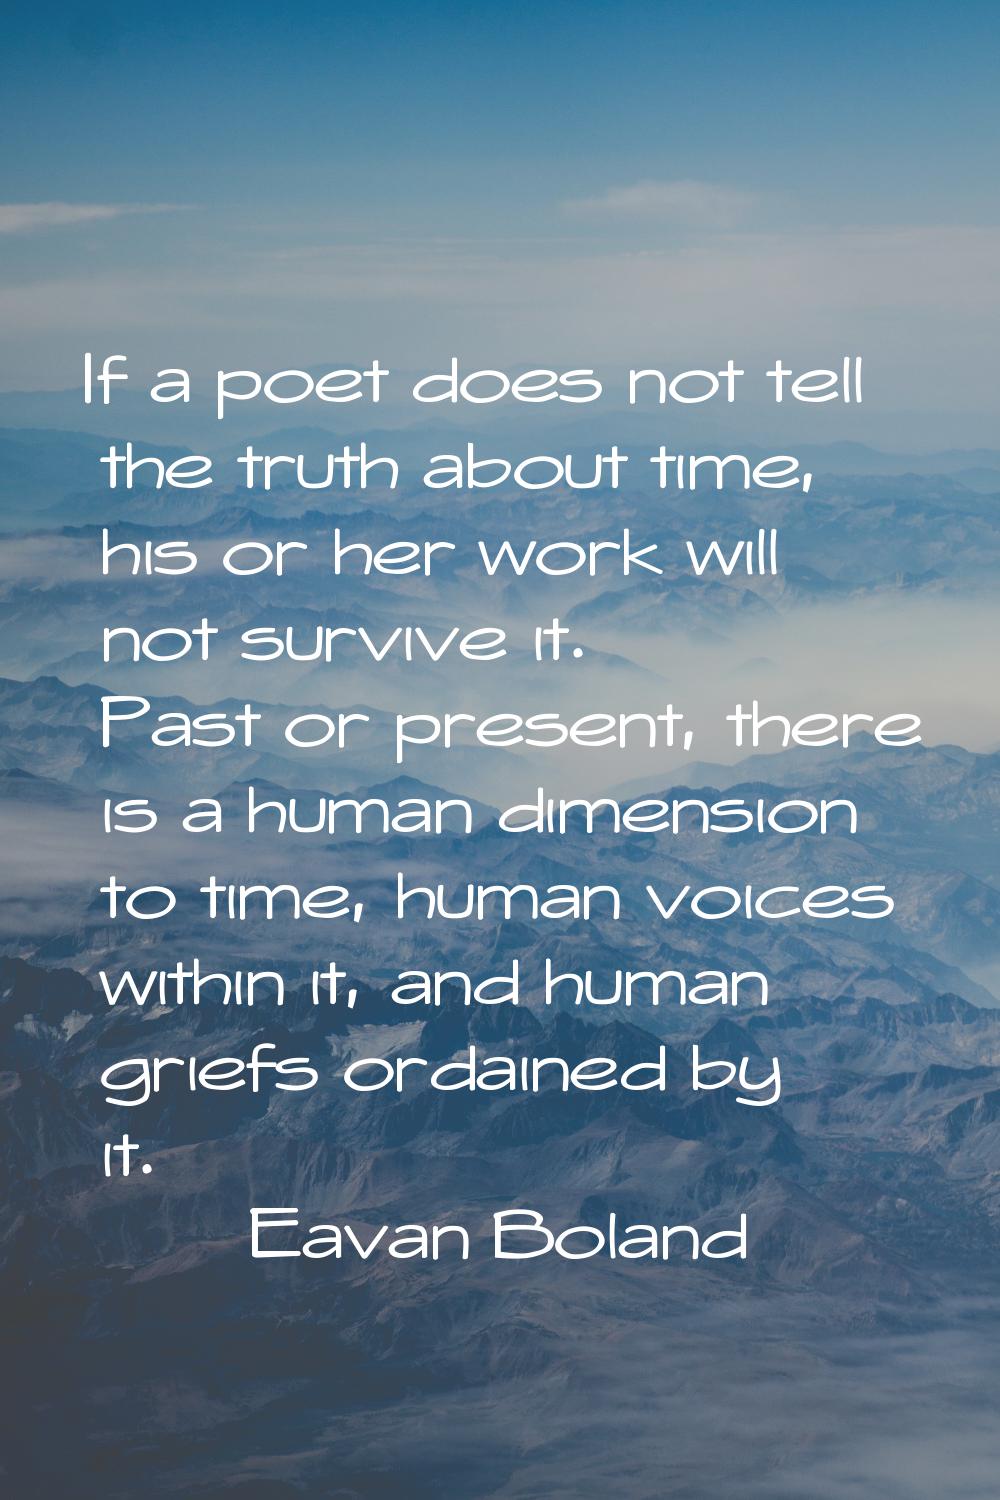 If a poet does not tell the truth about time, his or her work will not survive it. Past or present,